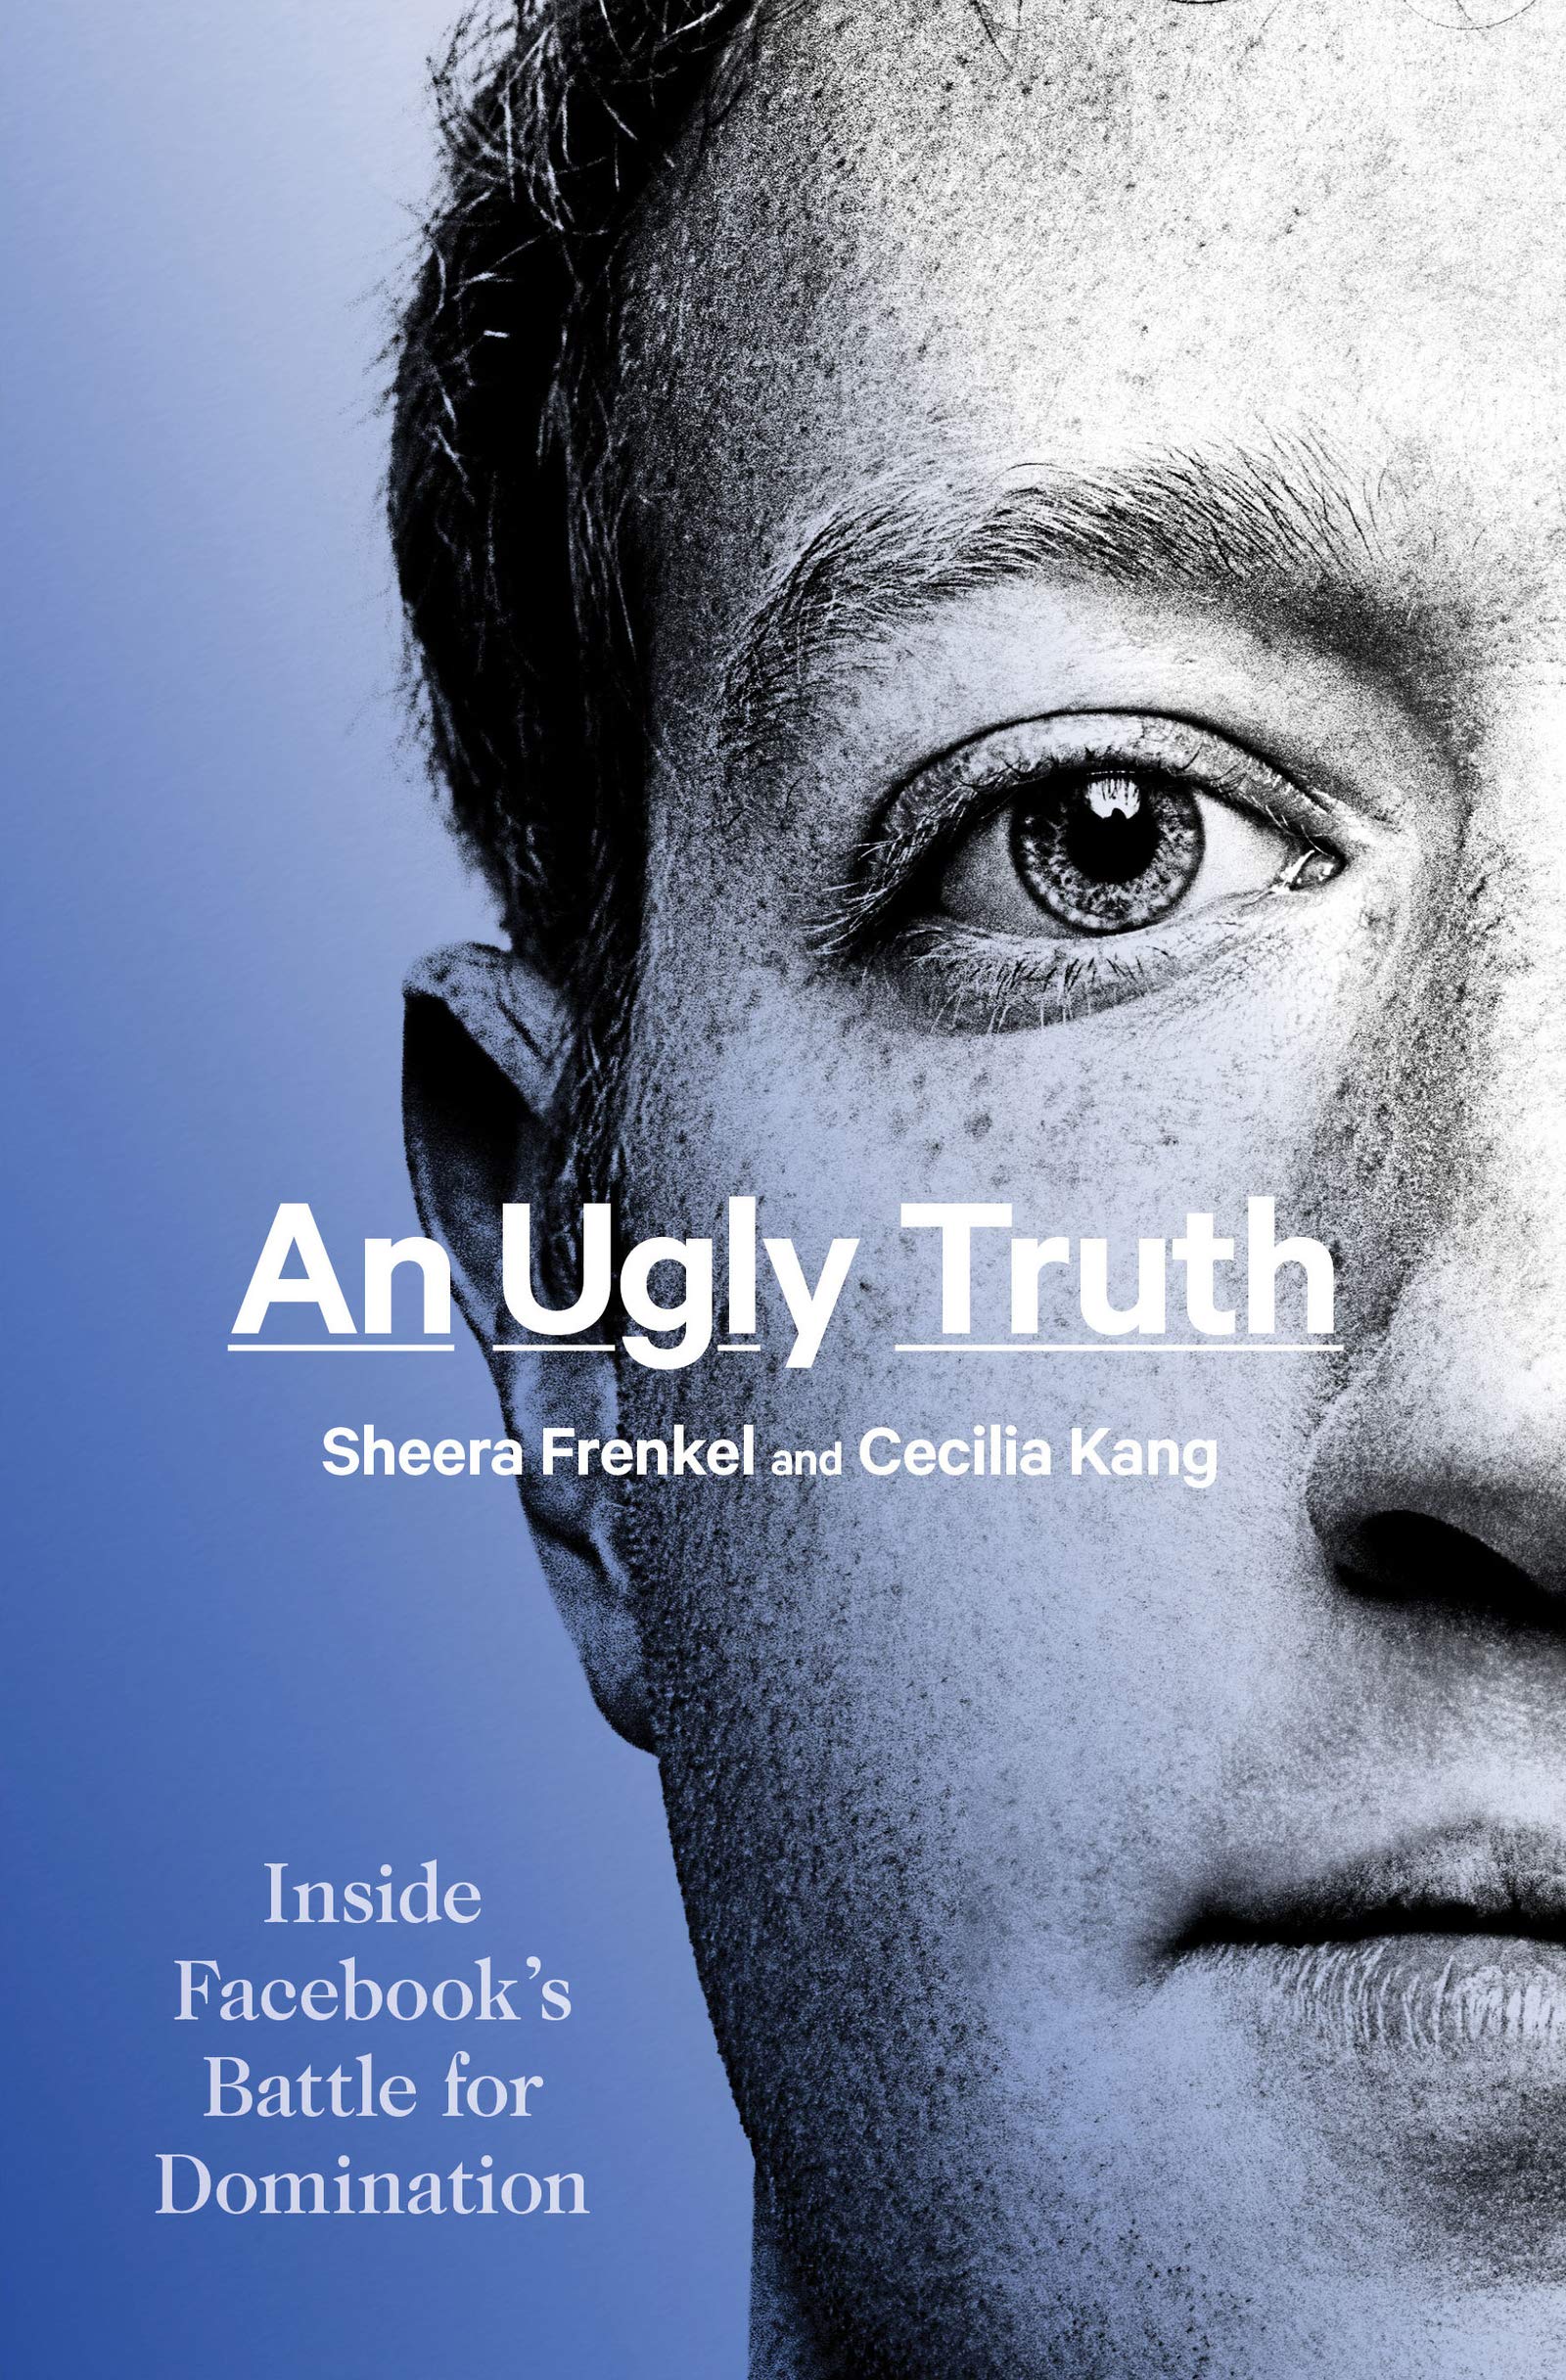 An Ugly Truth: Inside Facebook's Battle for Domination Hardcover by Sheera Frenkel, Cecilia Kang